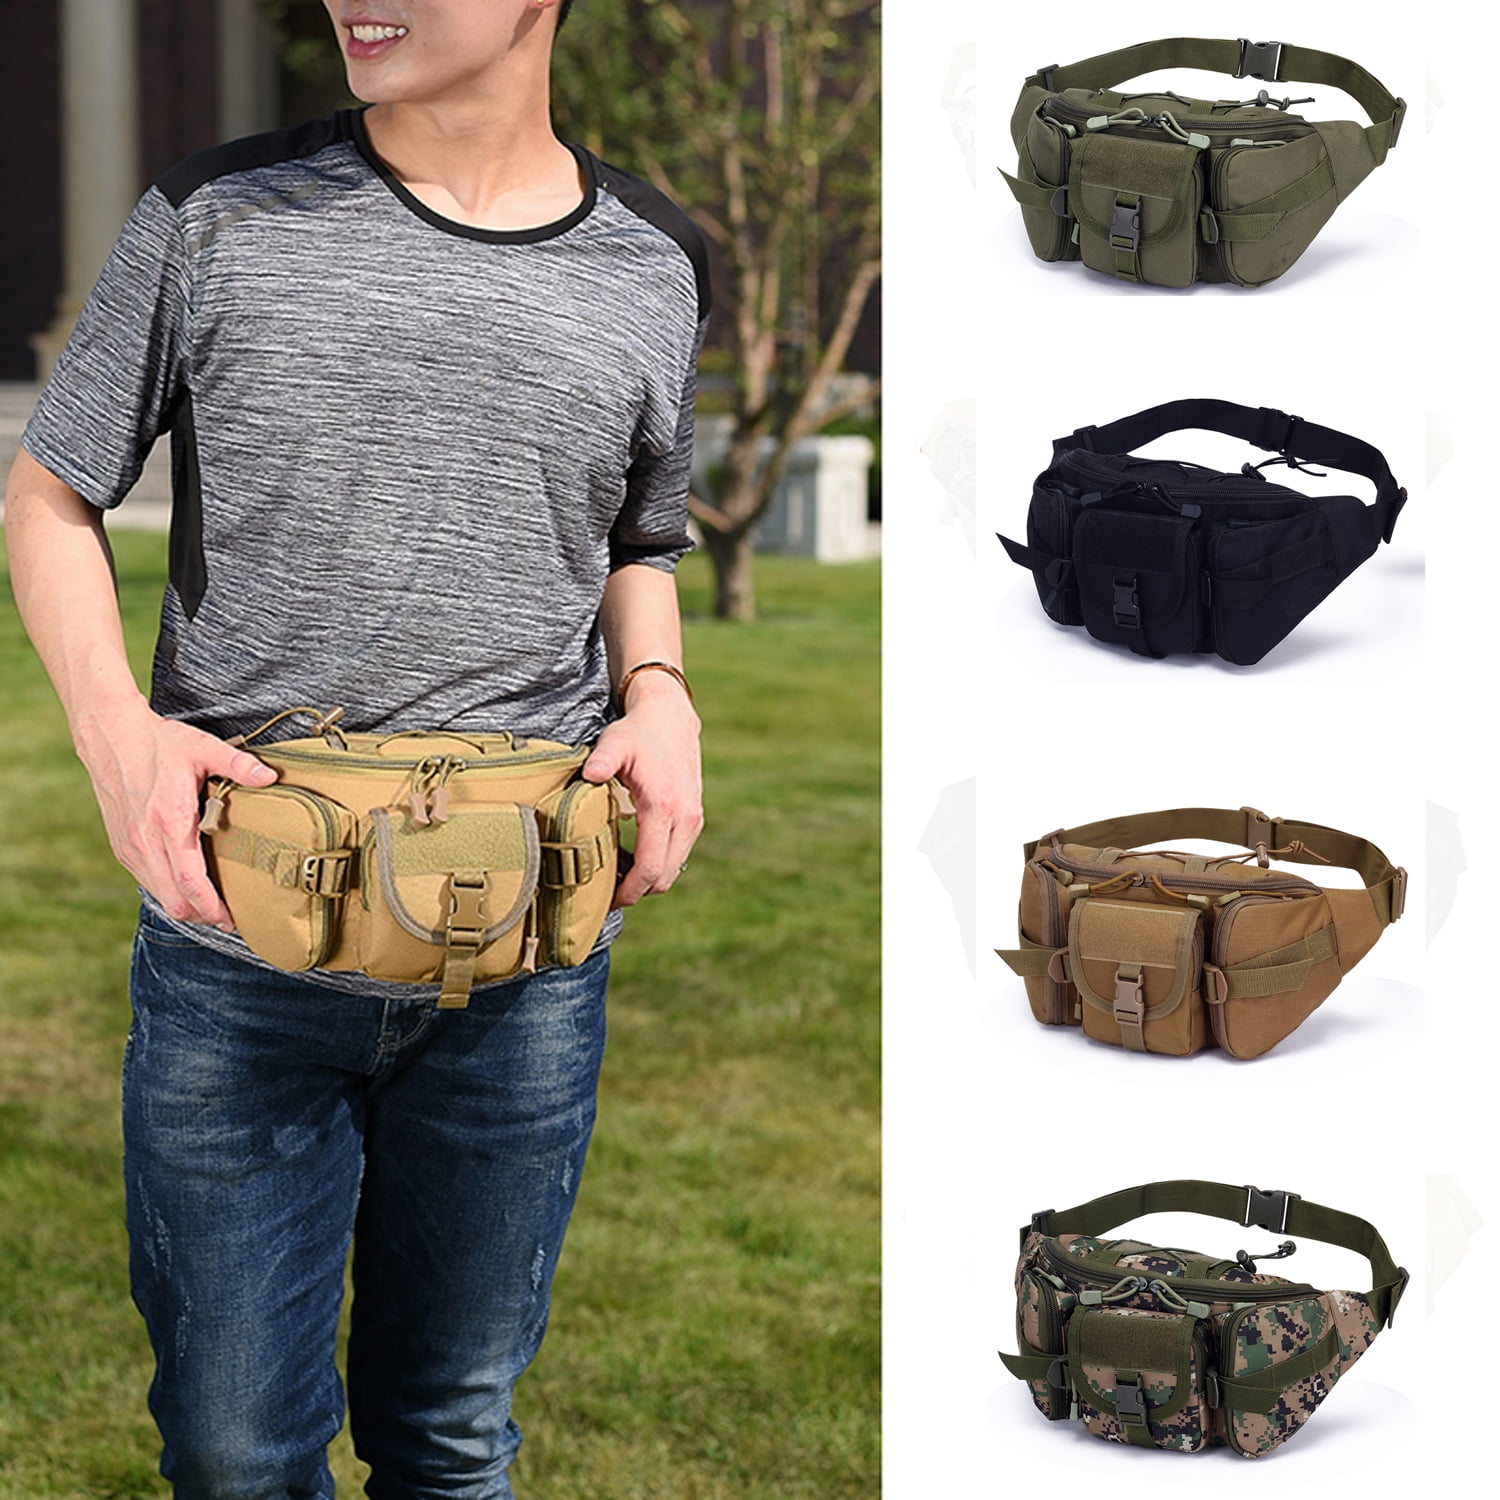 Tactical Fanny Pack-military Waist Bag Utility Hip Bags Belt Bumbag For  Outdoors Camping Cycling Hiking With U.s Patch And Extender Strap (1 Pack  Gree